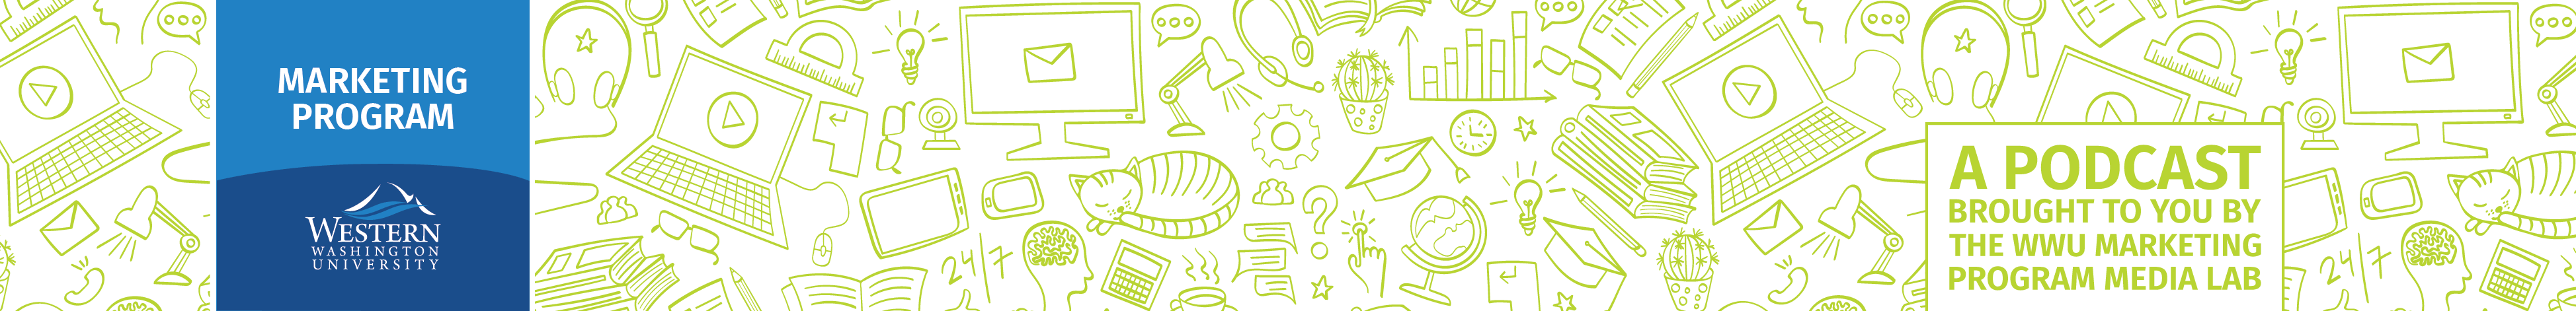 podcast header banner with green squiggly drawings and logo